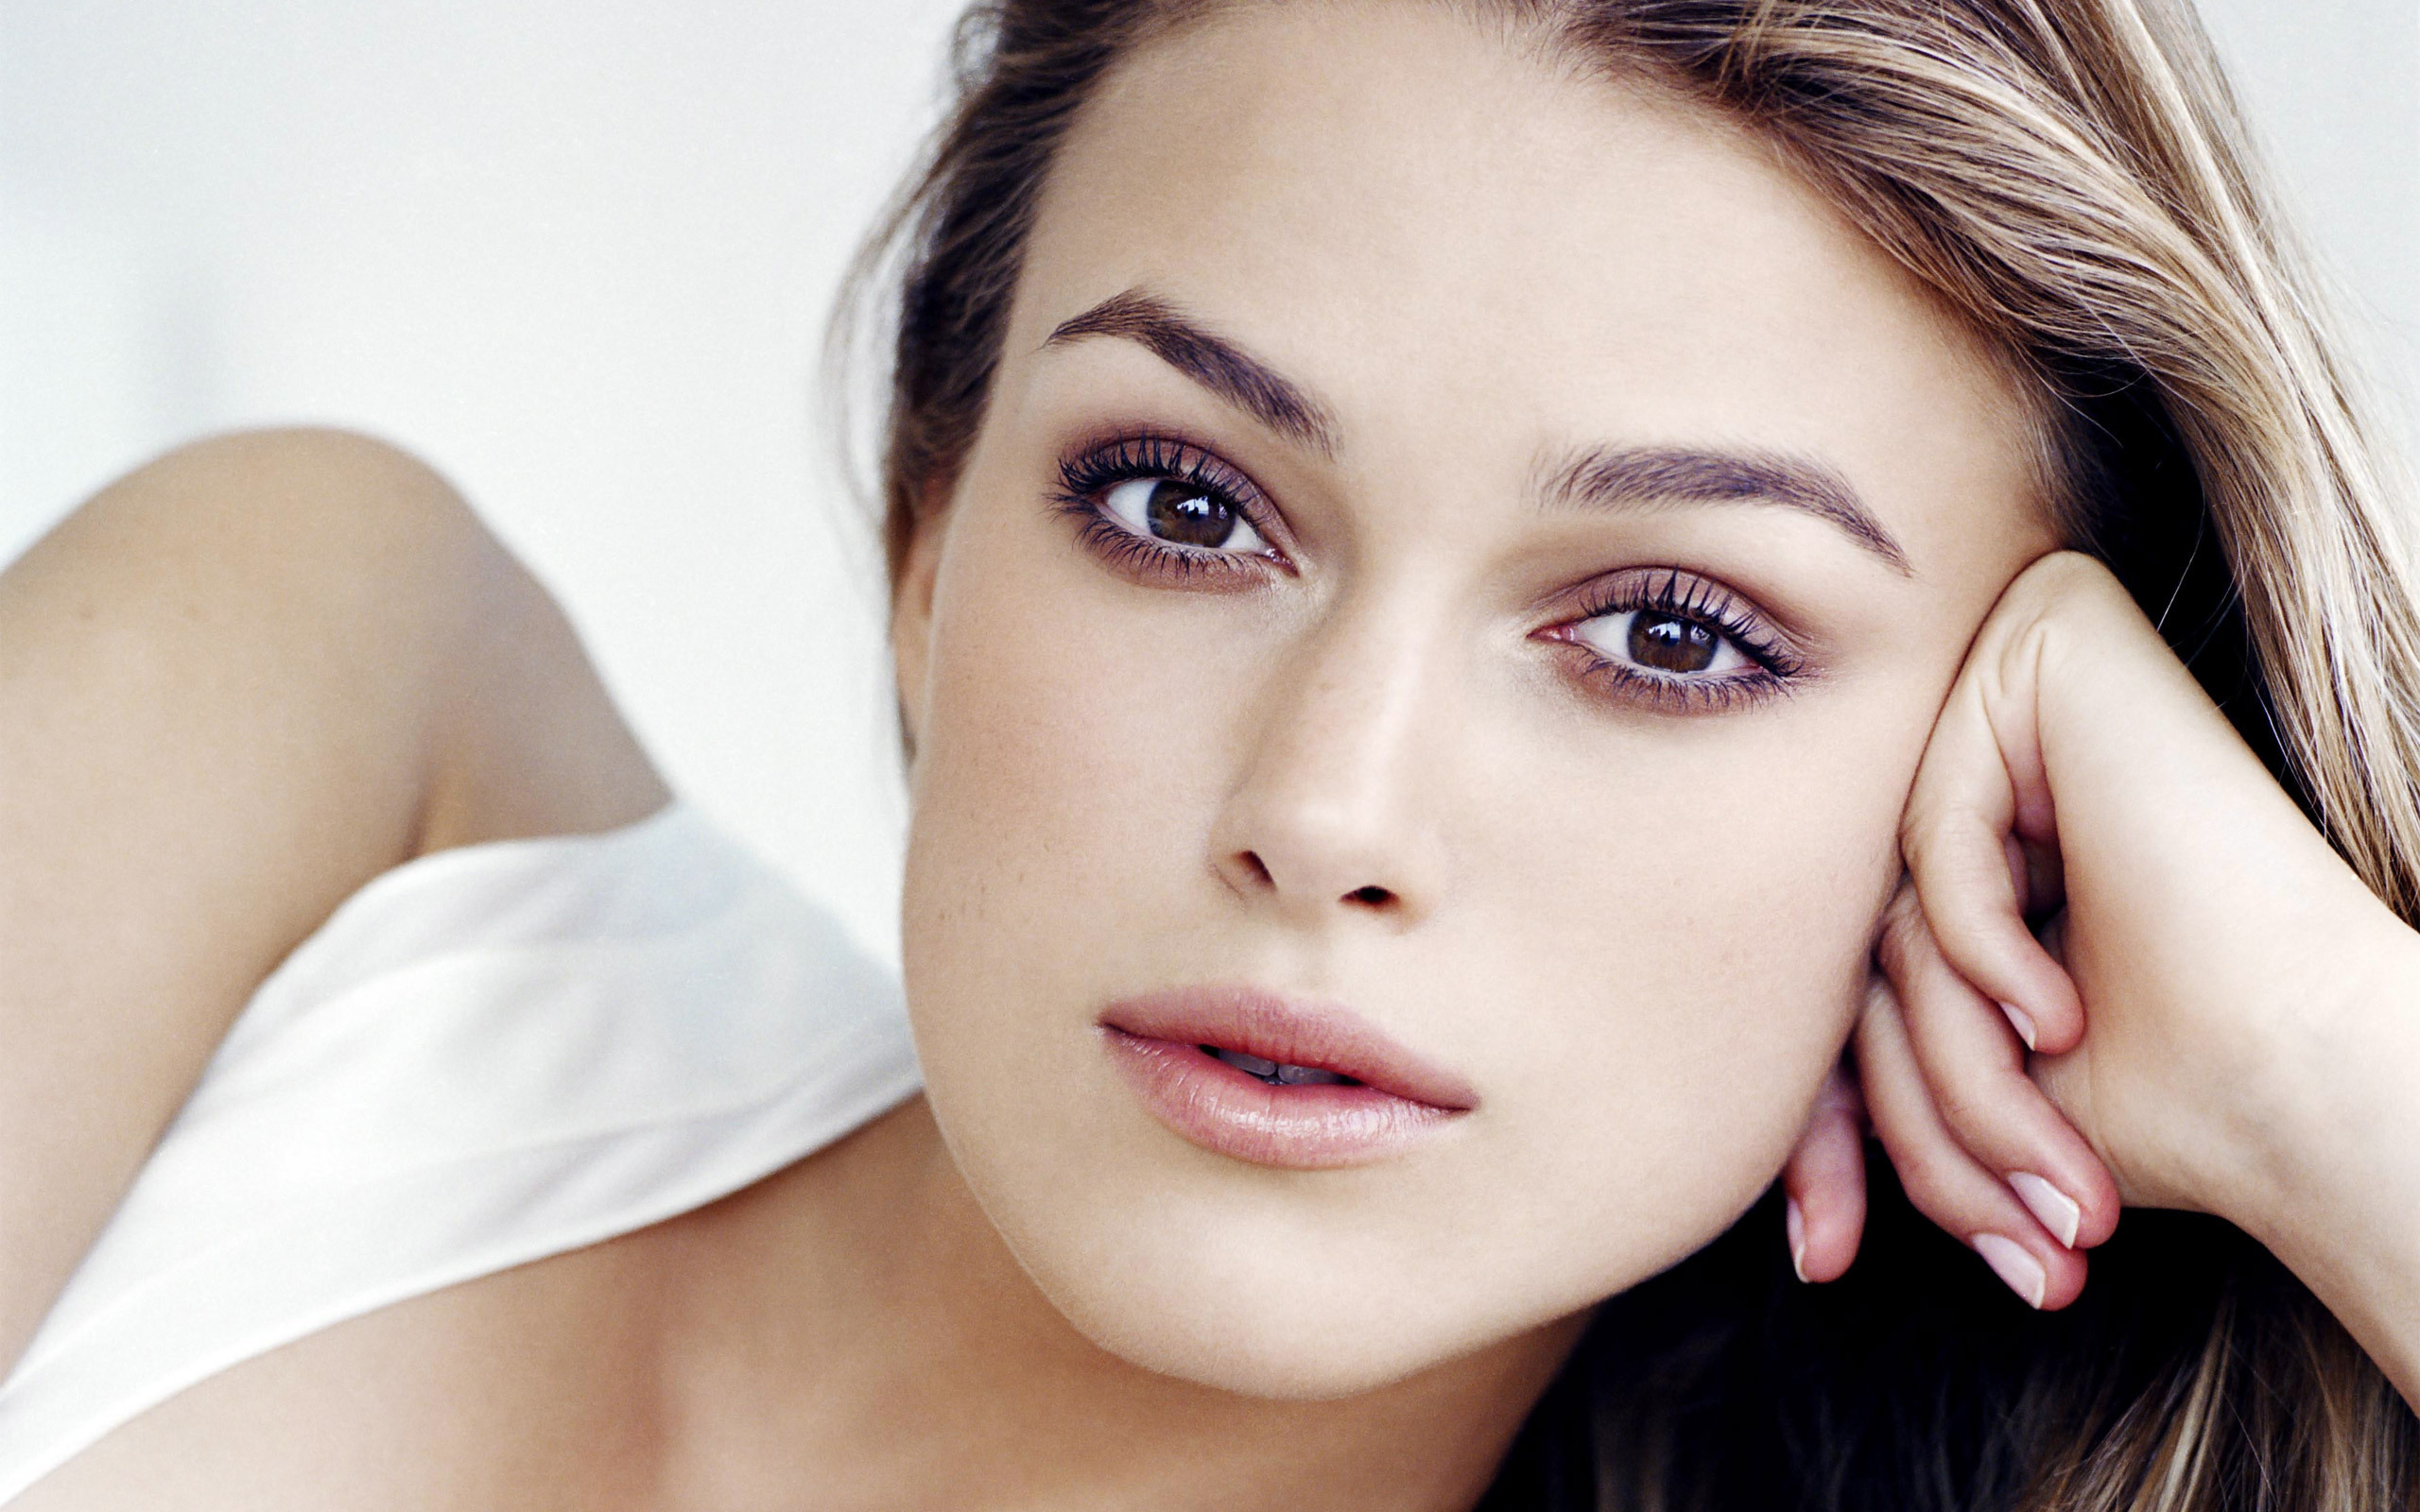 Wallpapers Female Face Faces Actress Keira Knightley Beautiful